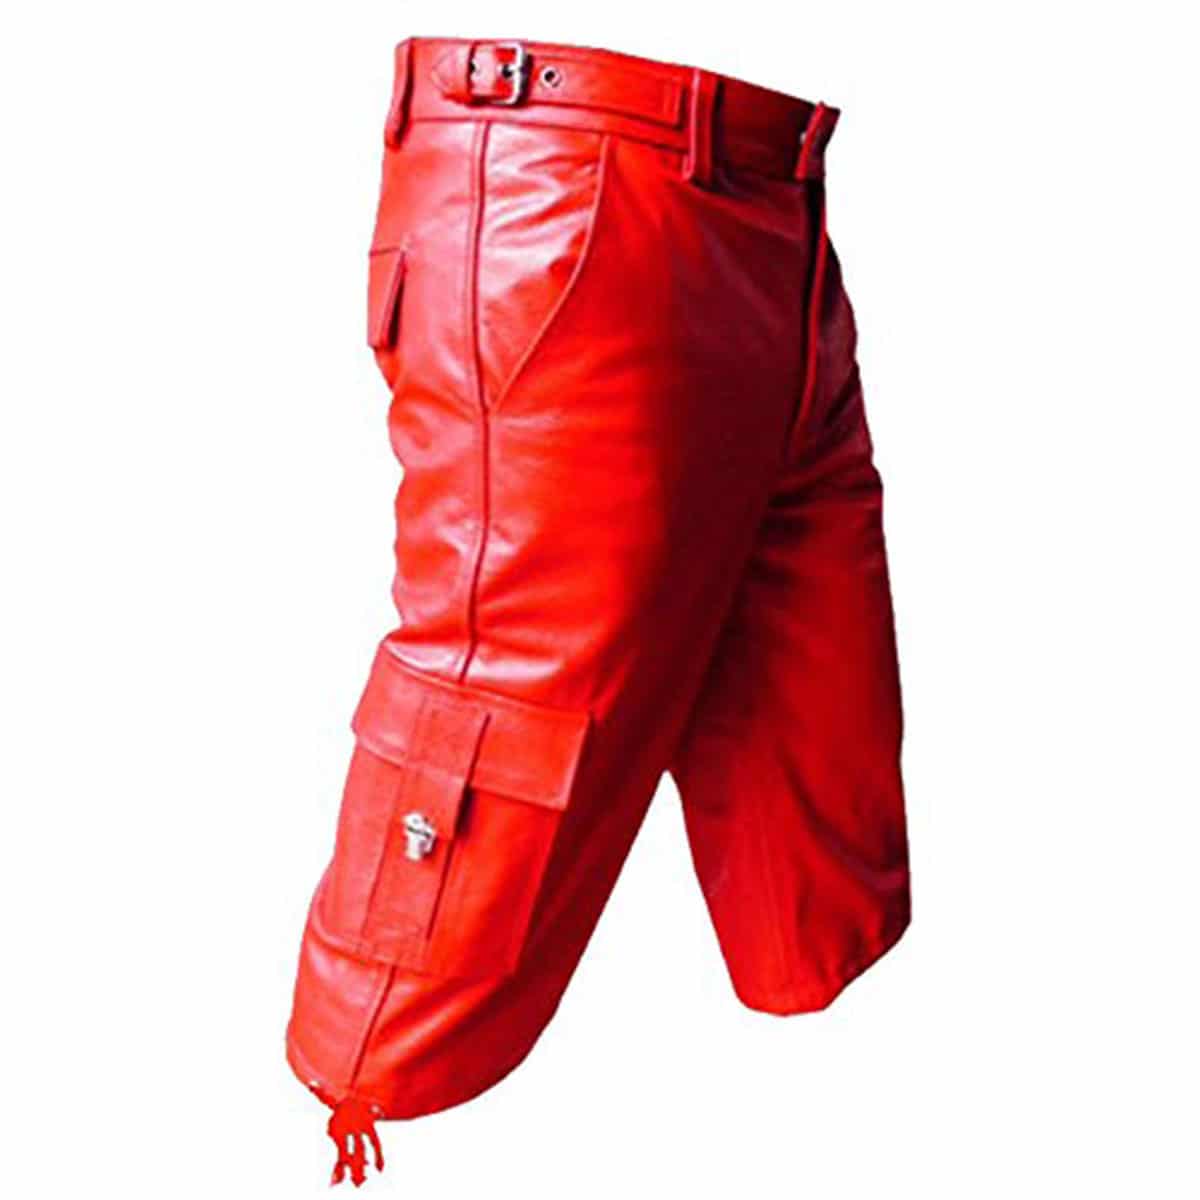 MENS COMBAT CARGO SHORTS GENUINE RED LEATHER - CARGO1 - RED